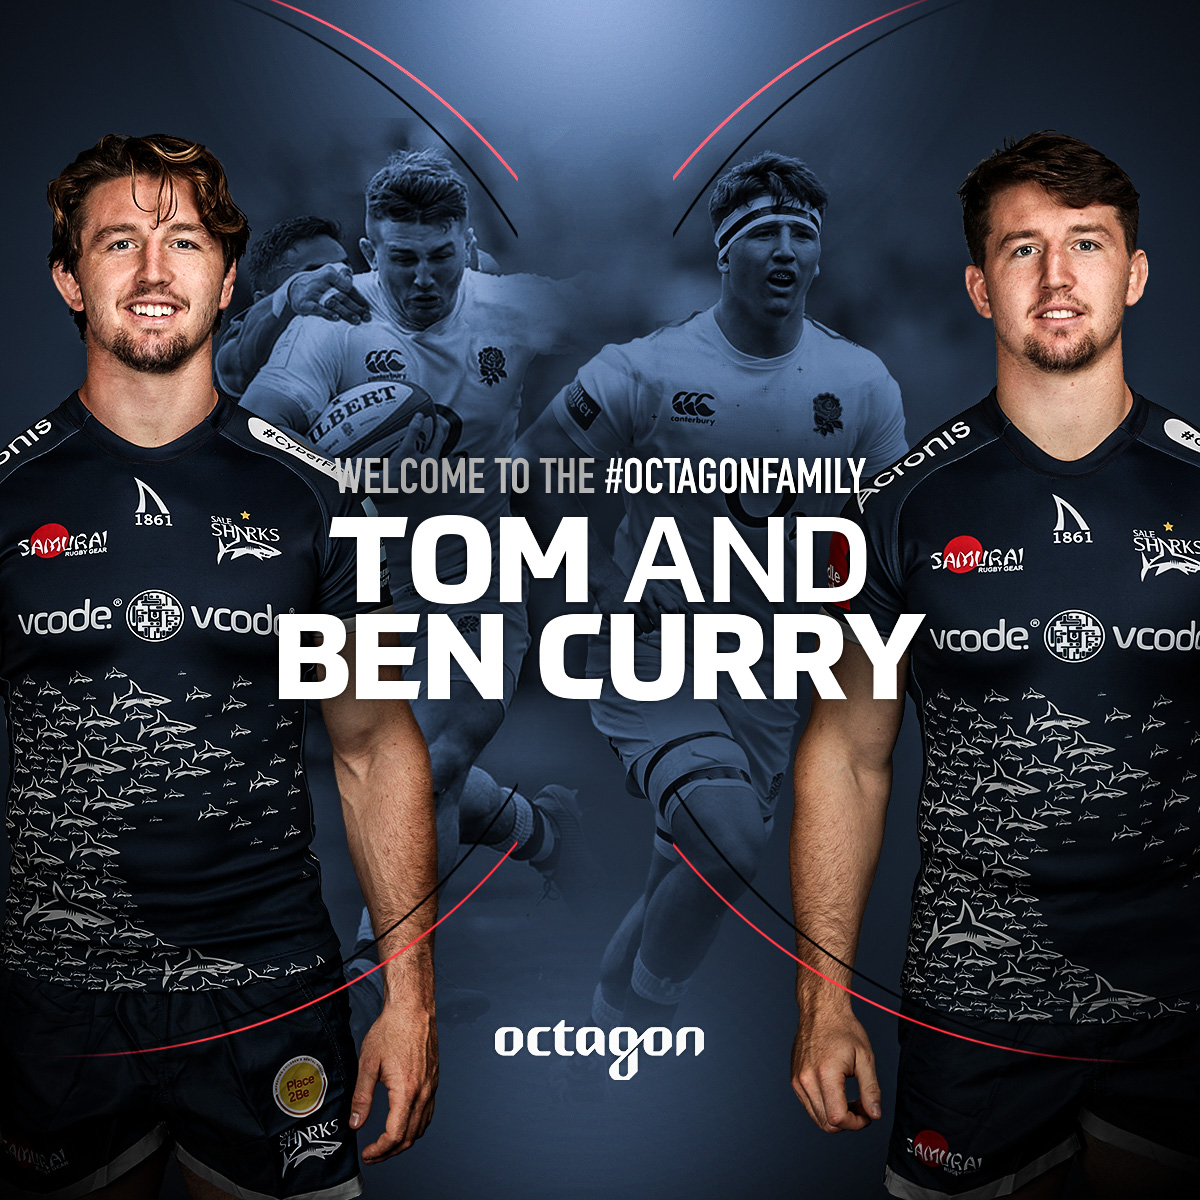 Excited to welcome international Rugby stars @TomCurry98 and @BenCurry98 to the #OctagonFamily. 🏉🏉